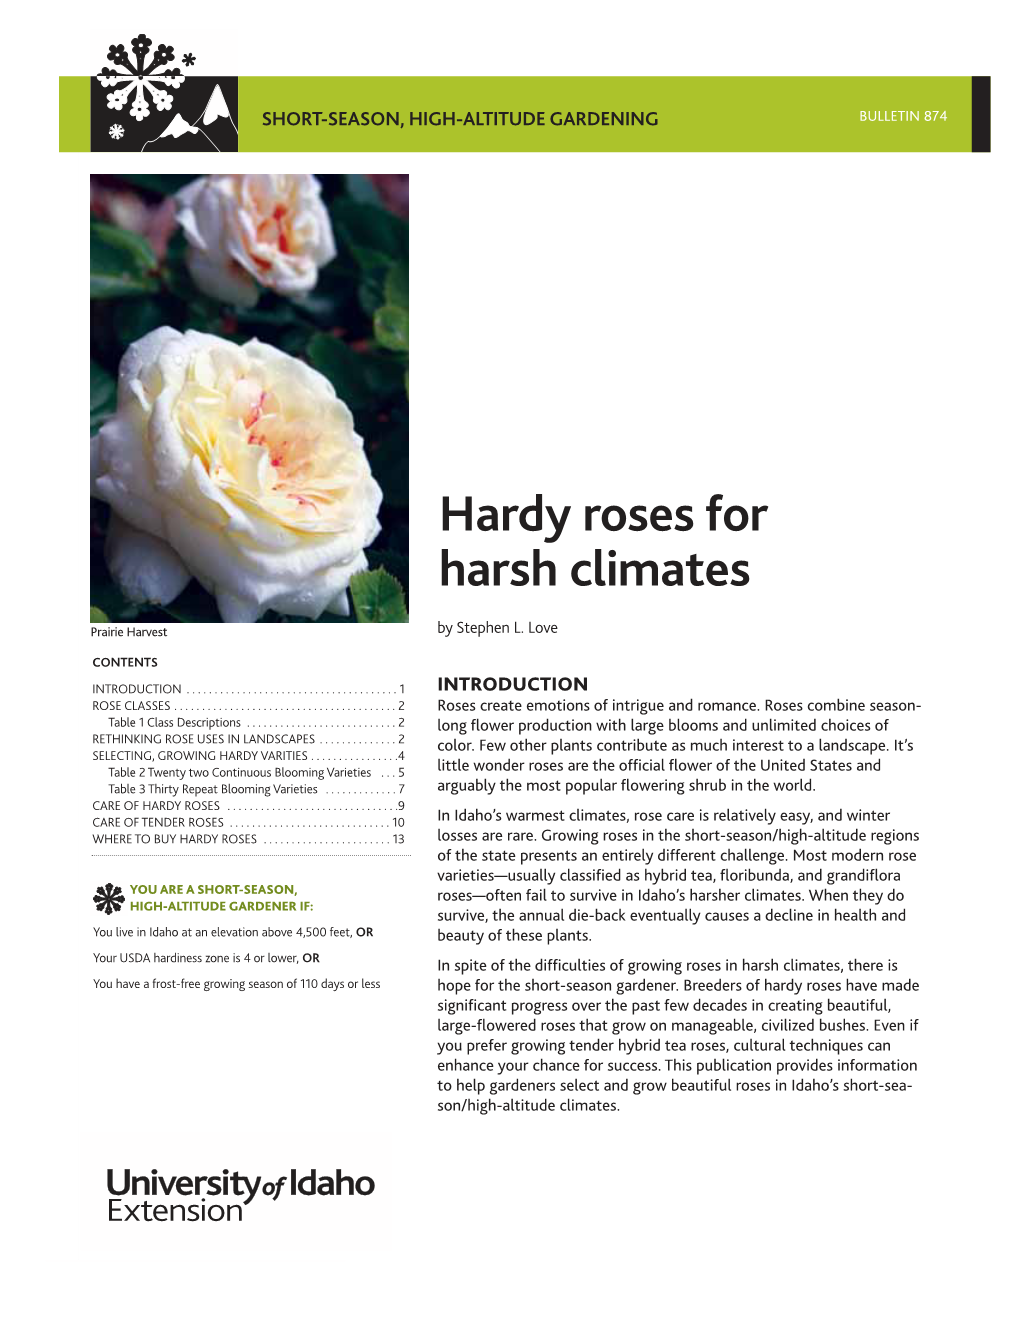 Hardy Roses for Harsh Climates